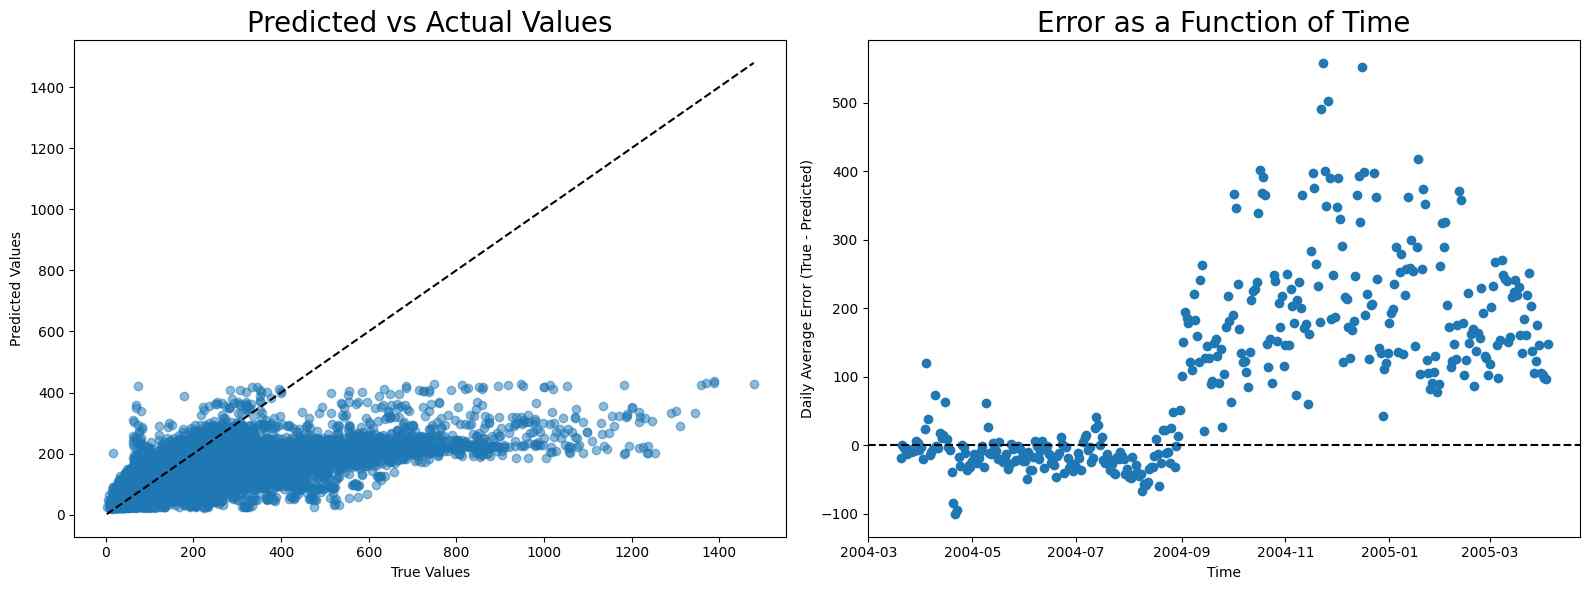 The fitting result of NOx using random forest and the error as a function of time.